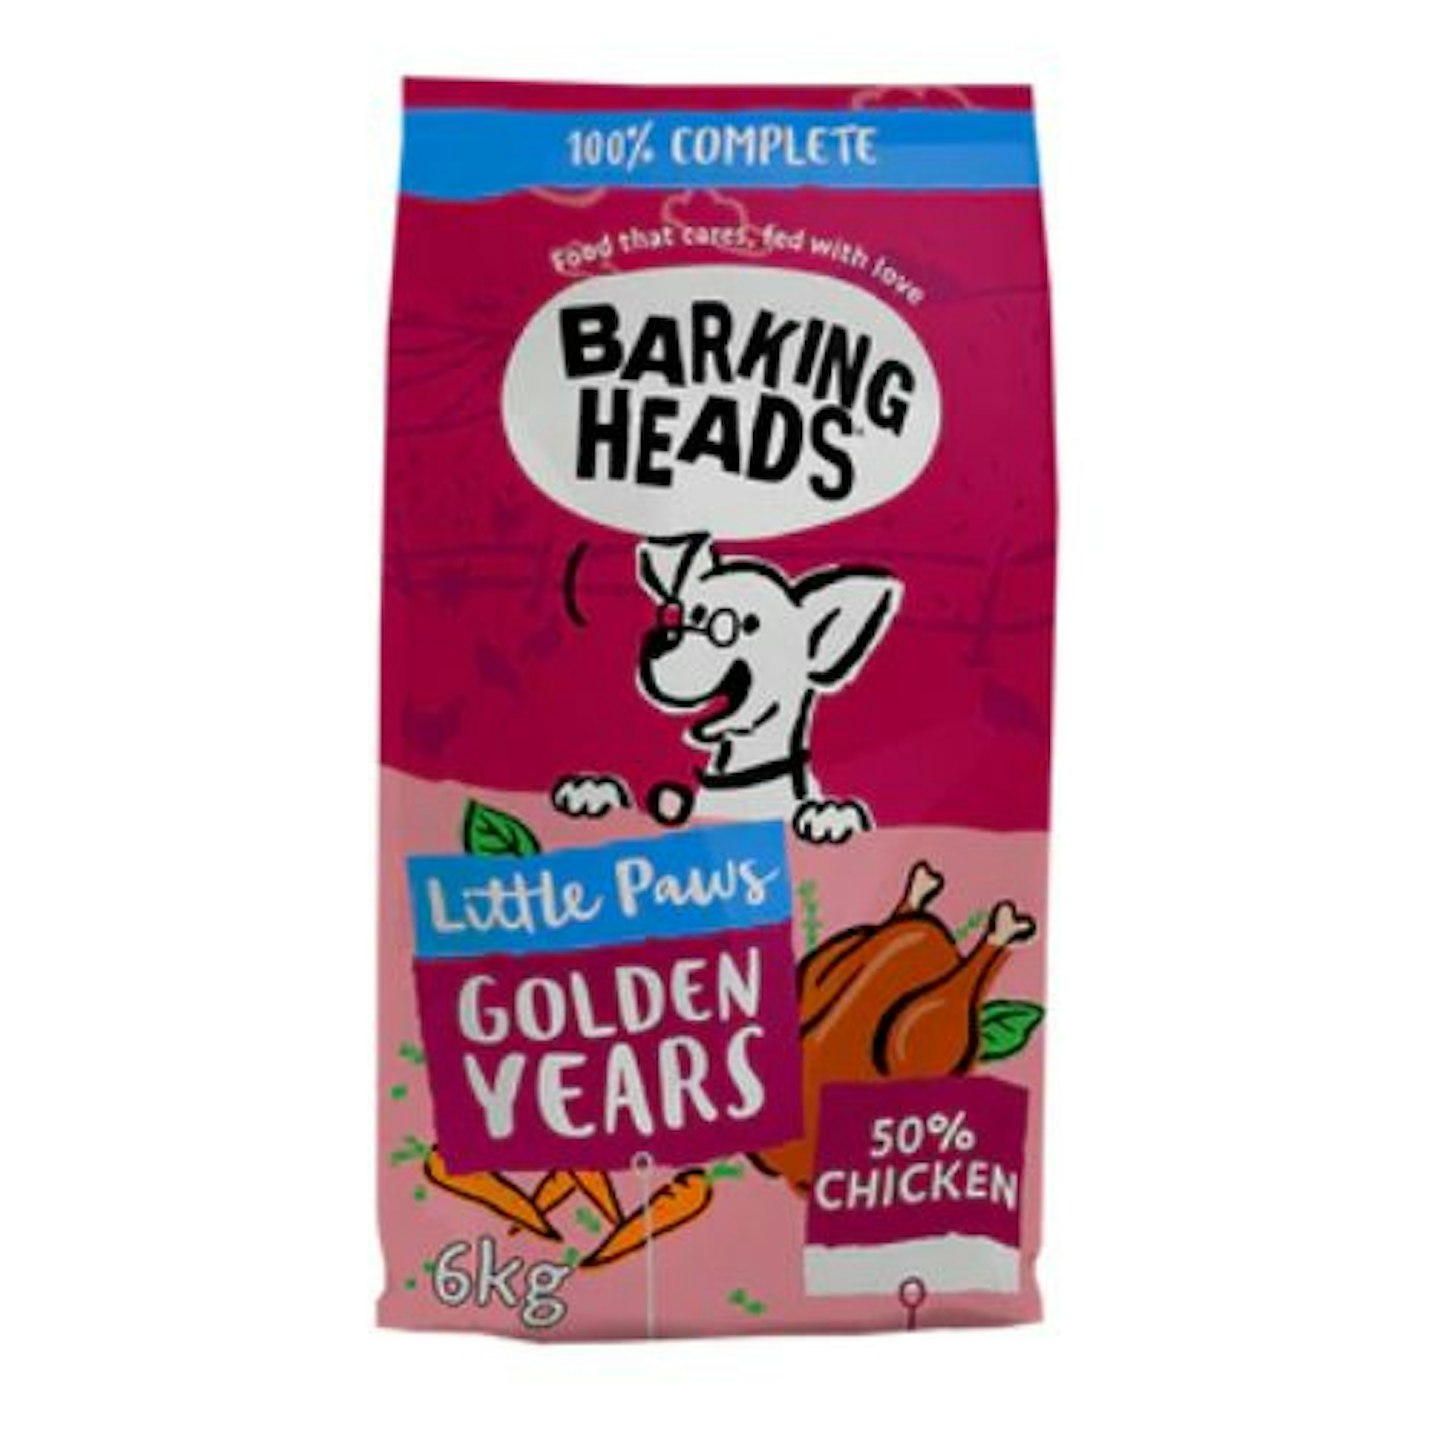 Barking Heads Little Paws Golden Years Dry Dog Food 1.5kg